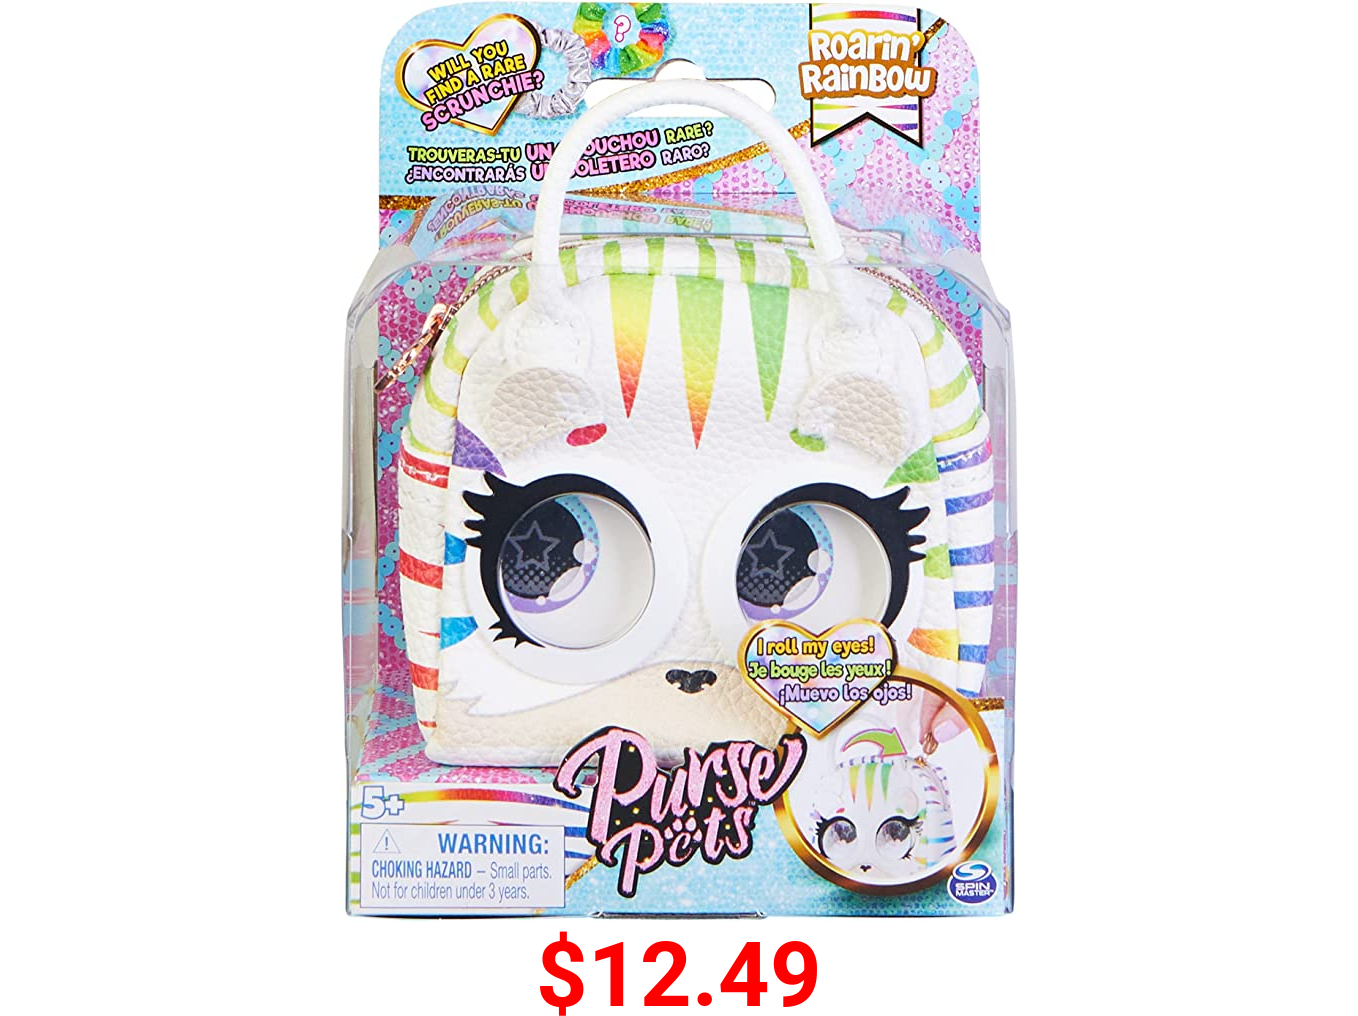 Purse Pets Micros, Roarin’ Rainbow Tiger Stylish Small Purse with Eye Roll Feature, Kids Toys for Girls Aged 5 and up